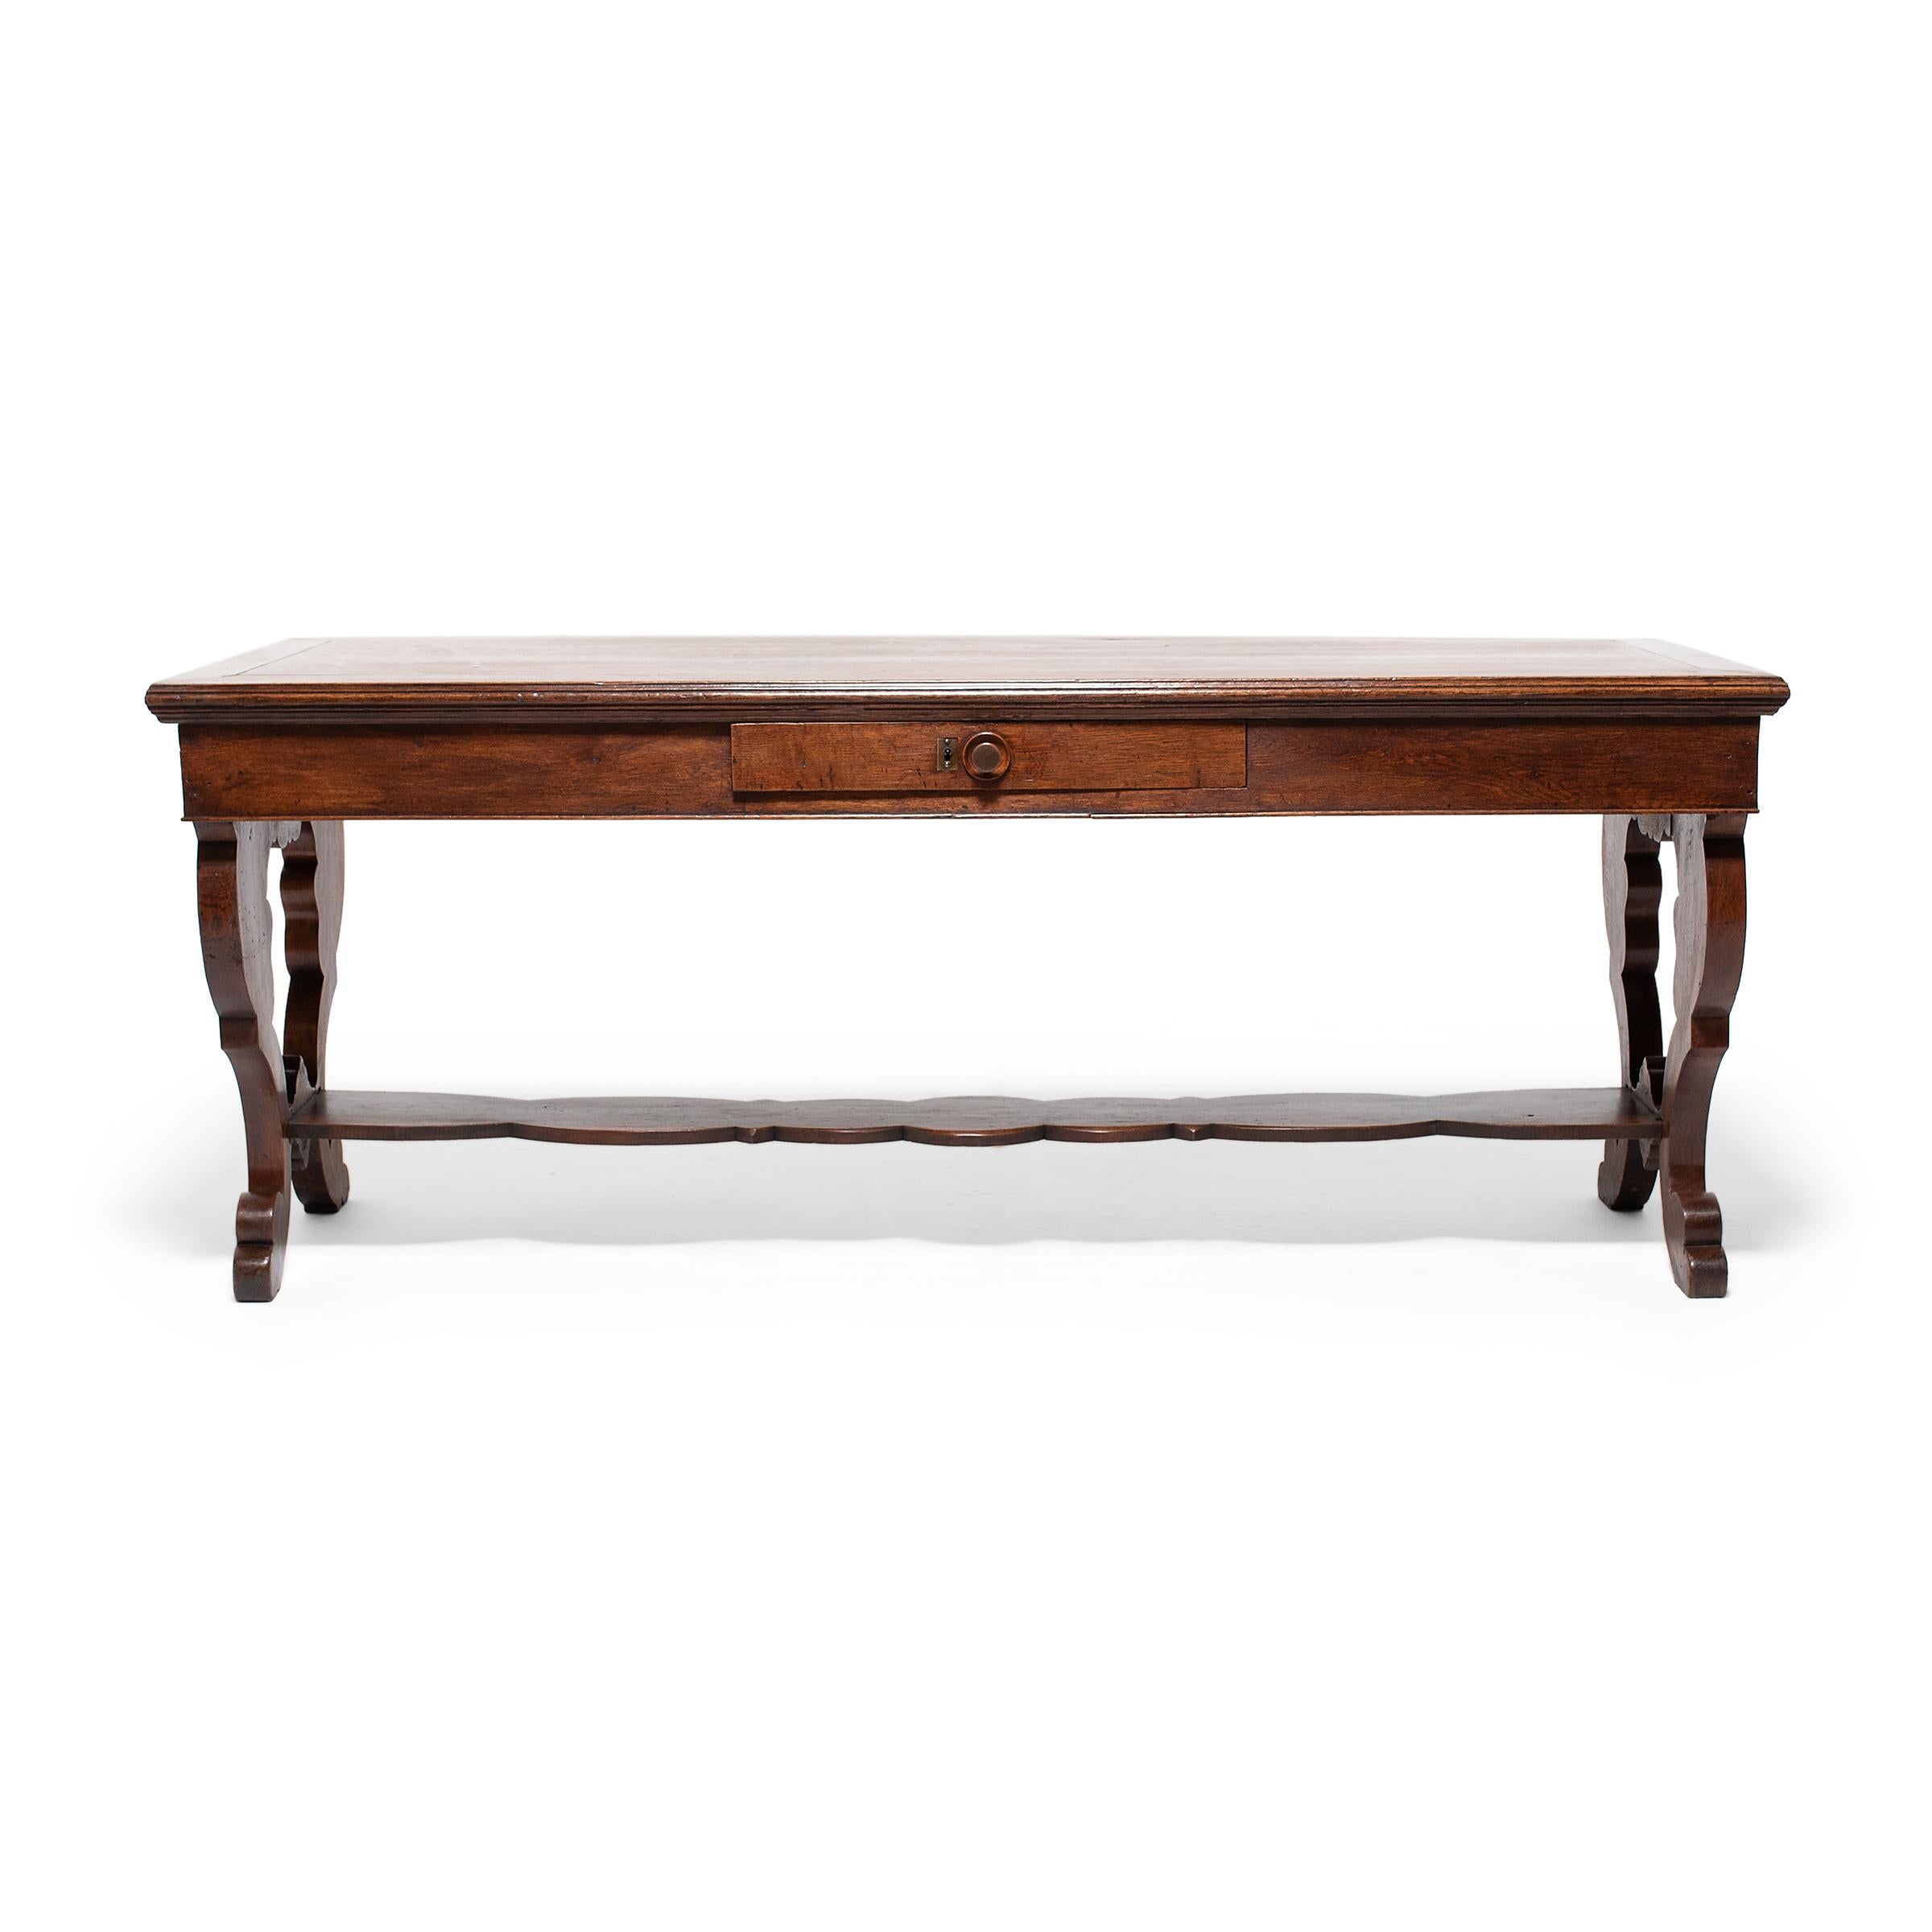 This grand oak writing table unites the refined flourishes of Regency-era English furniture with the timeless appeal of country antiques. Dated to the mid-19th century, the desk has a broad, rectangular top resting on stylized lyre-form end